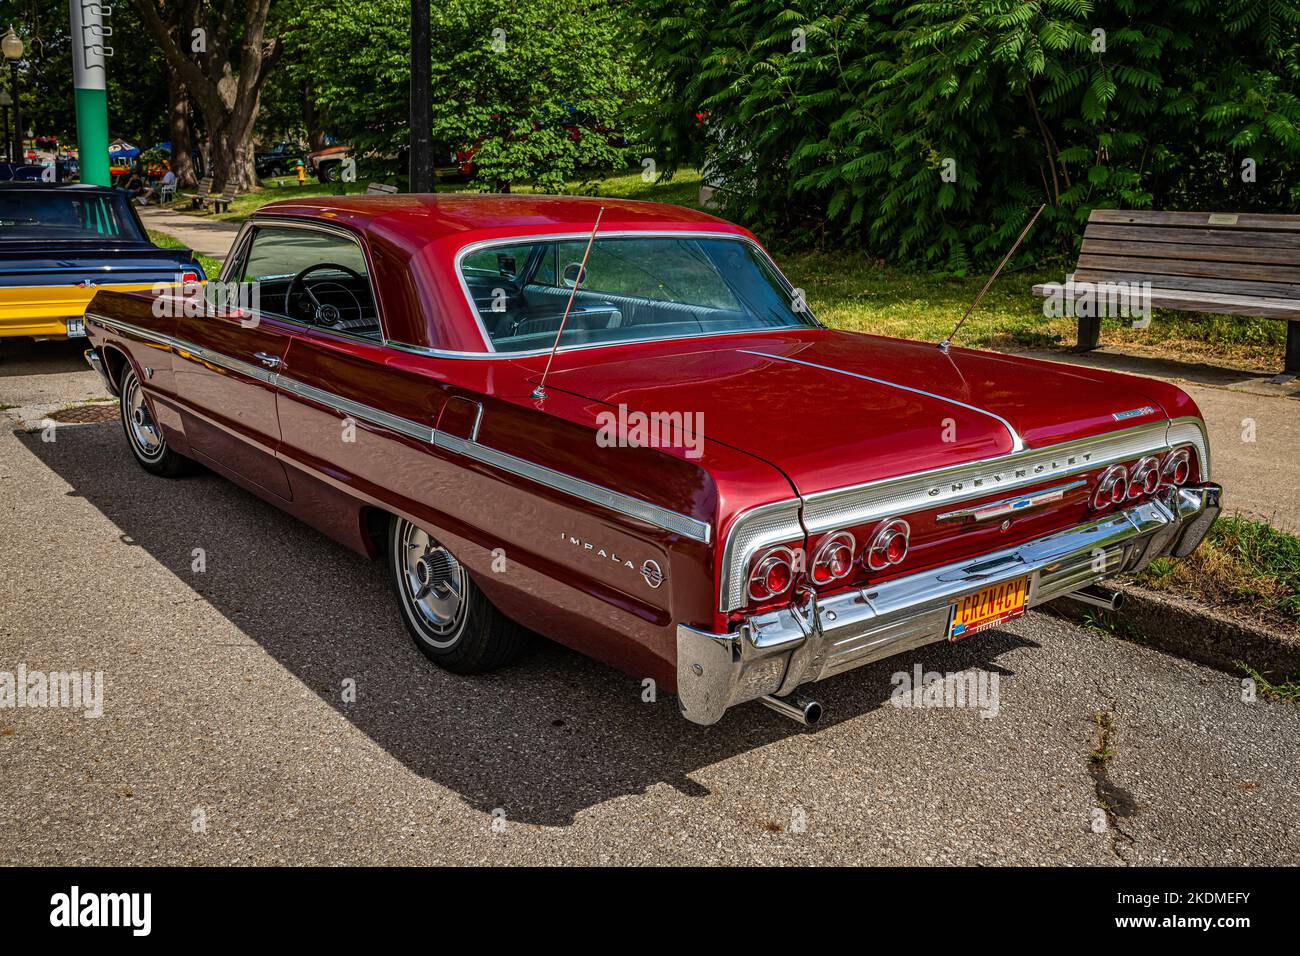 Des Moines, IA - July 02, 2022: High perspective rear corner view of a 1964 Chevrolet Impala SS Hardtop Coupe at a local car show. Stock Photo